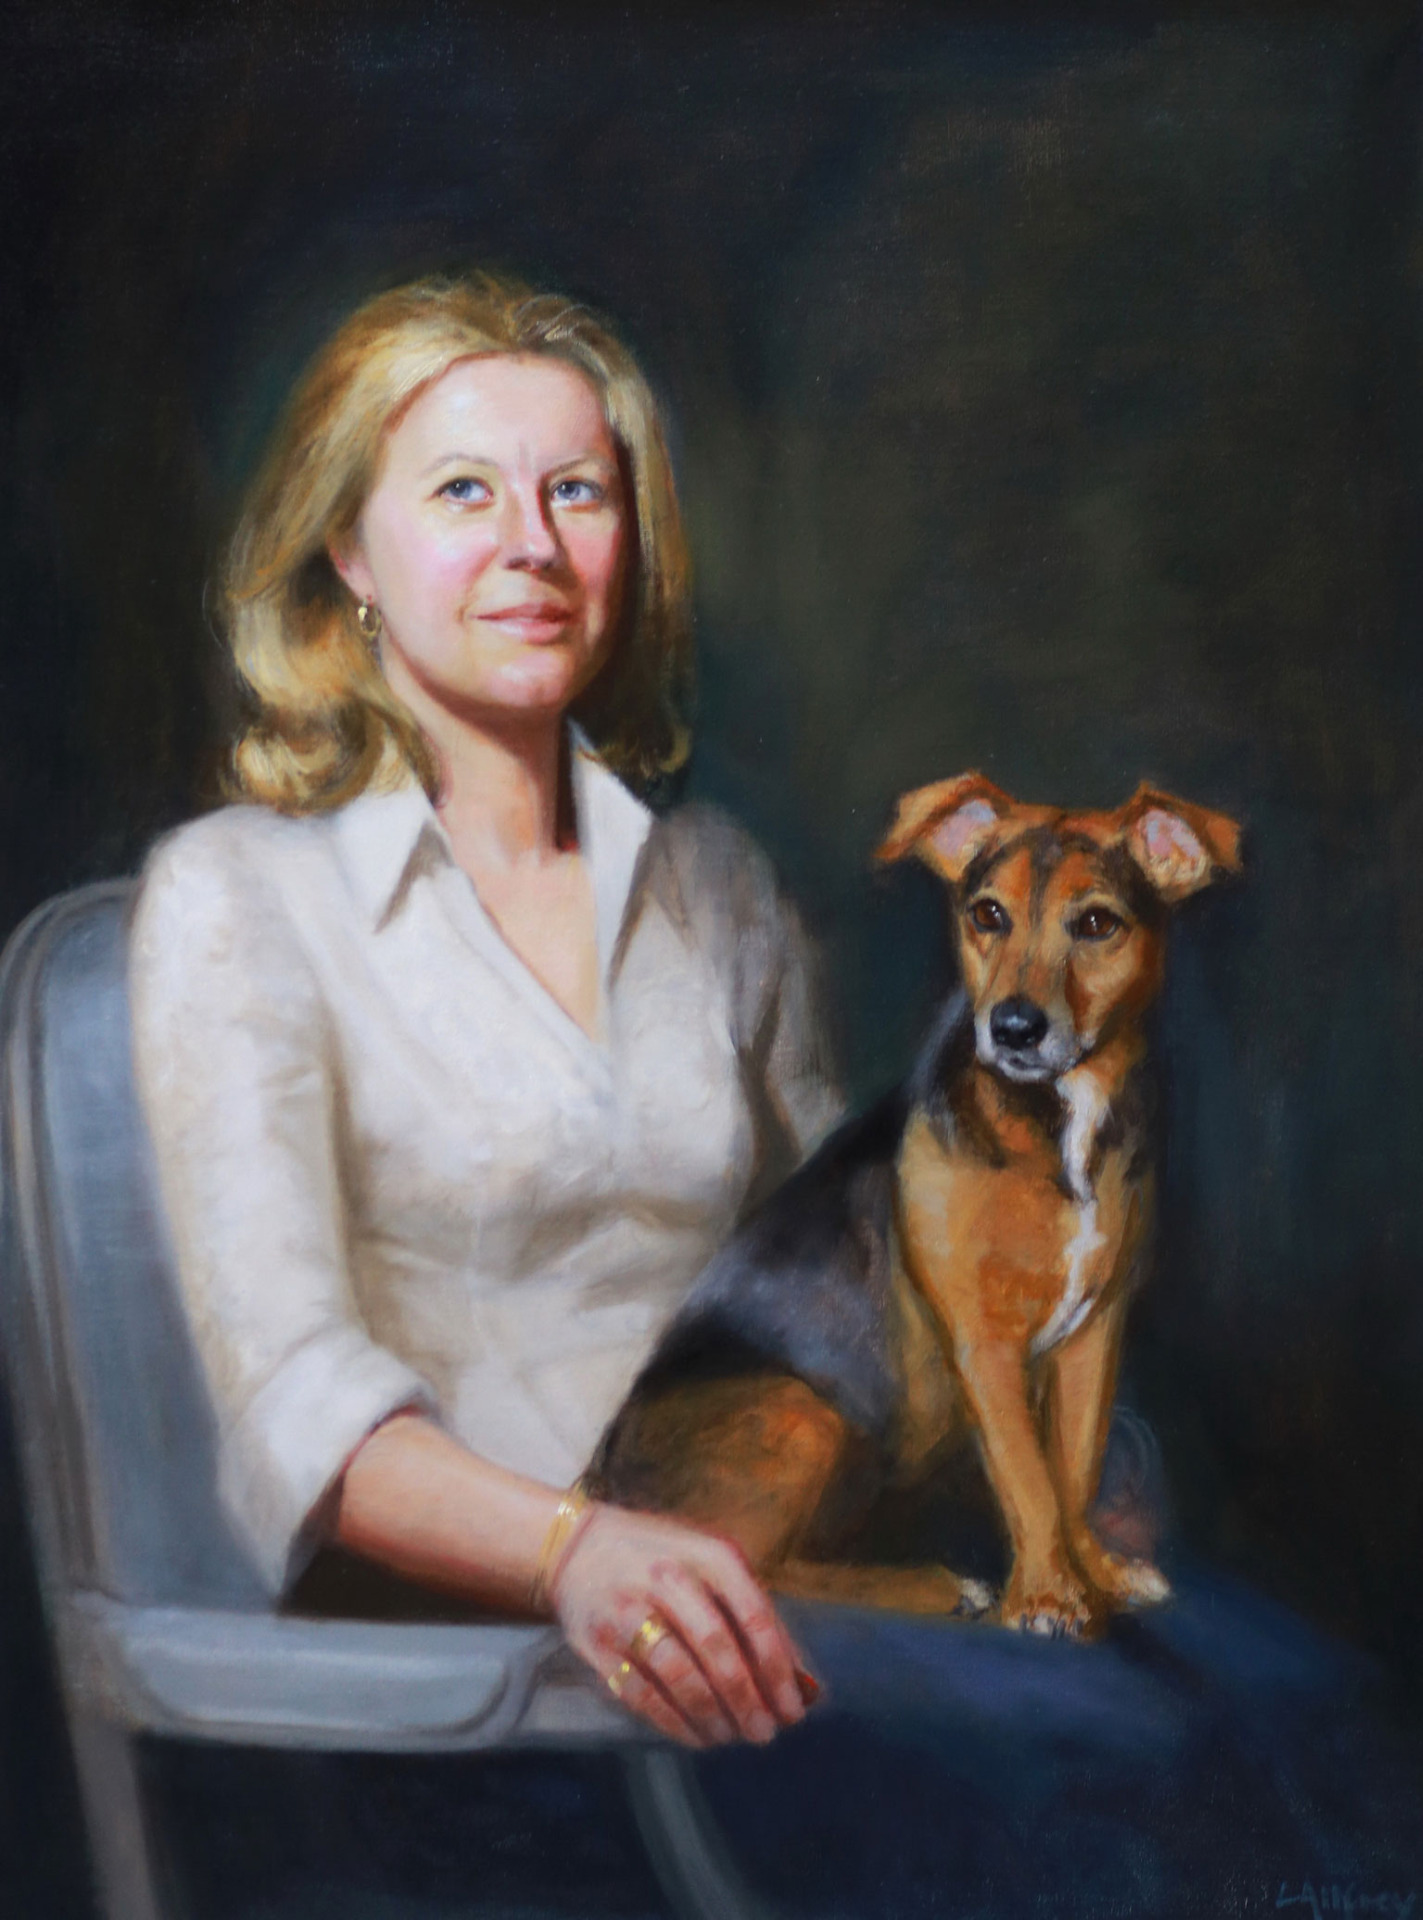 oil painting commission for special birthday with a painting of her dog